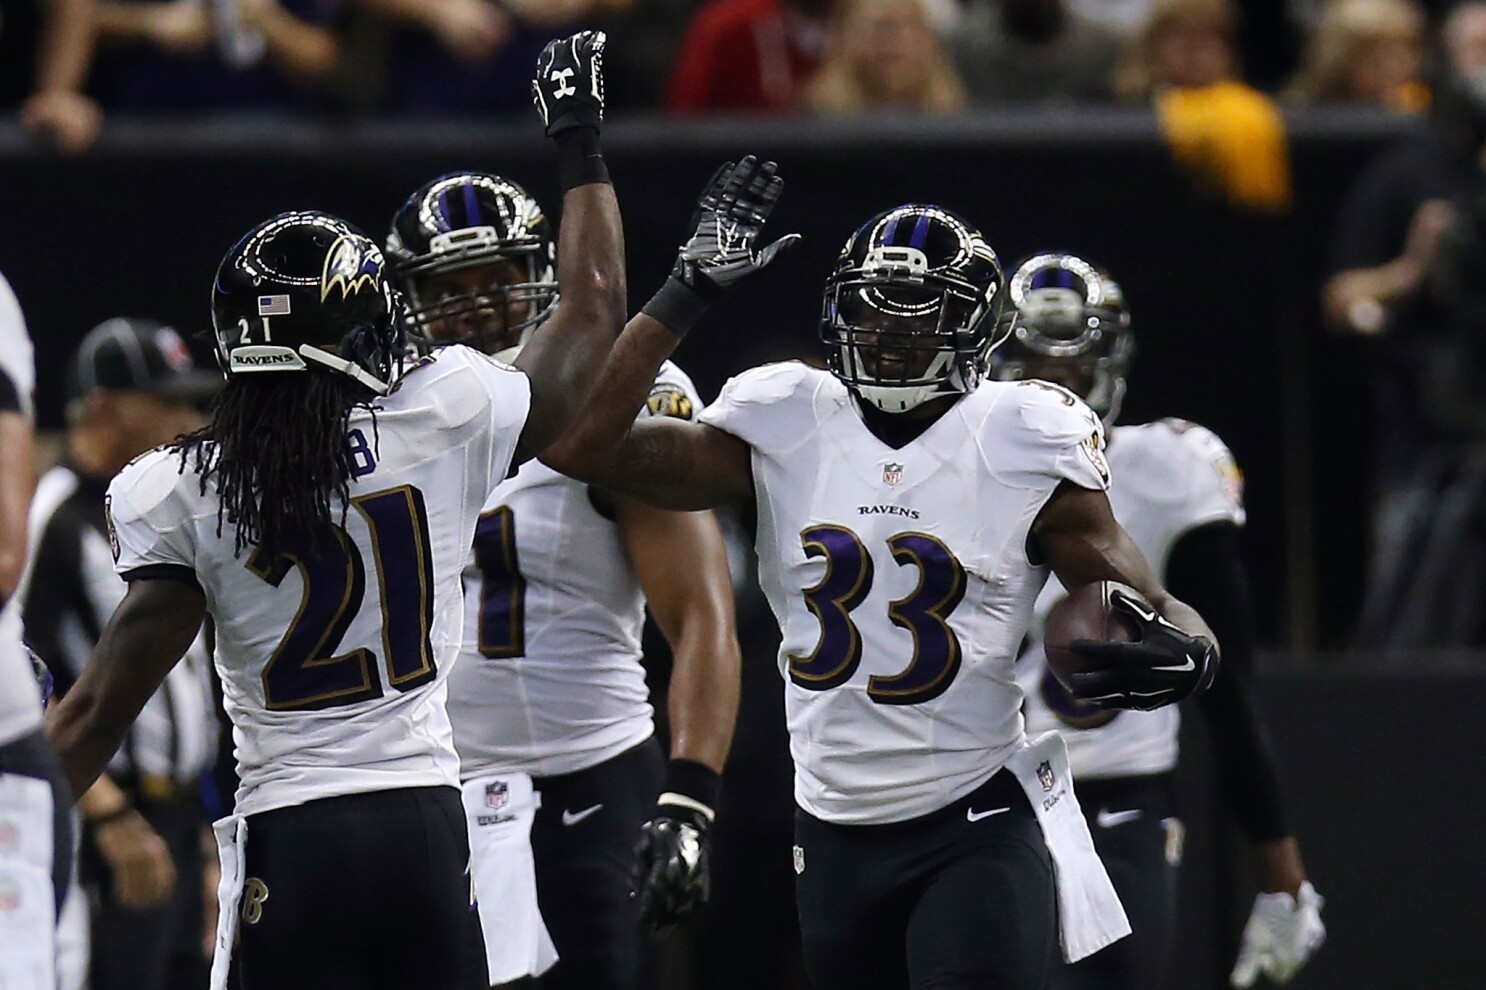 Challenged by coaches, Ravens safety Will Hill delivered game ...